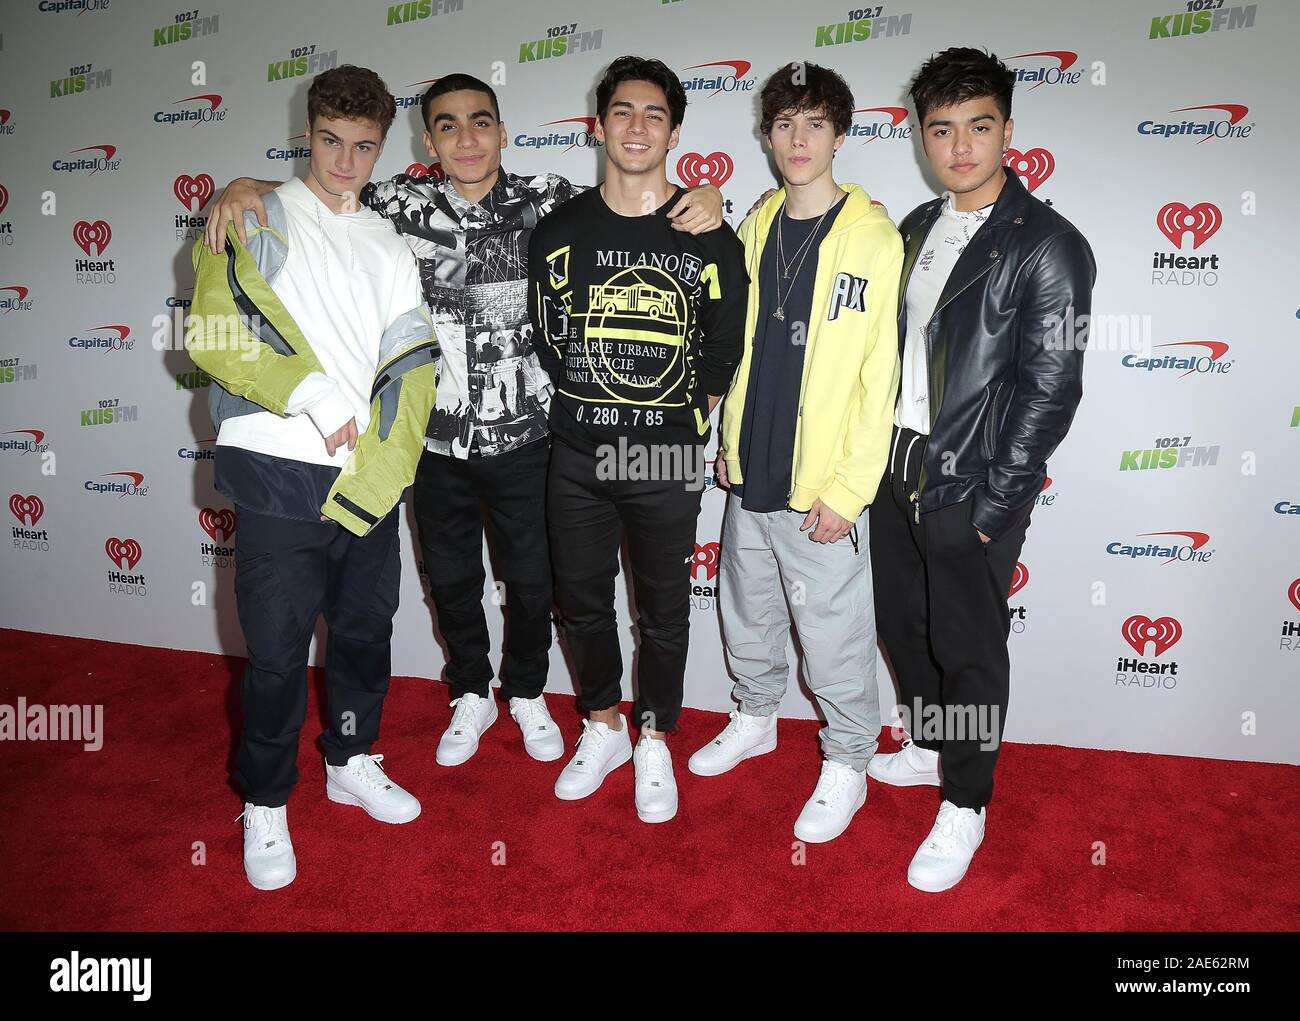 Brady Tutton, Drew Ramos, Chance Perez, Michael Conor, and Sergio Calderon of In Real Life at KIIS FMs iHeartRadio Jingle Ball 2019 held at the Forum Los Angeles on December 06, 2019 in Inglewood, California, United States (Photo by JC Olivera/Sipa USA) Stock Photo